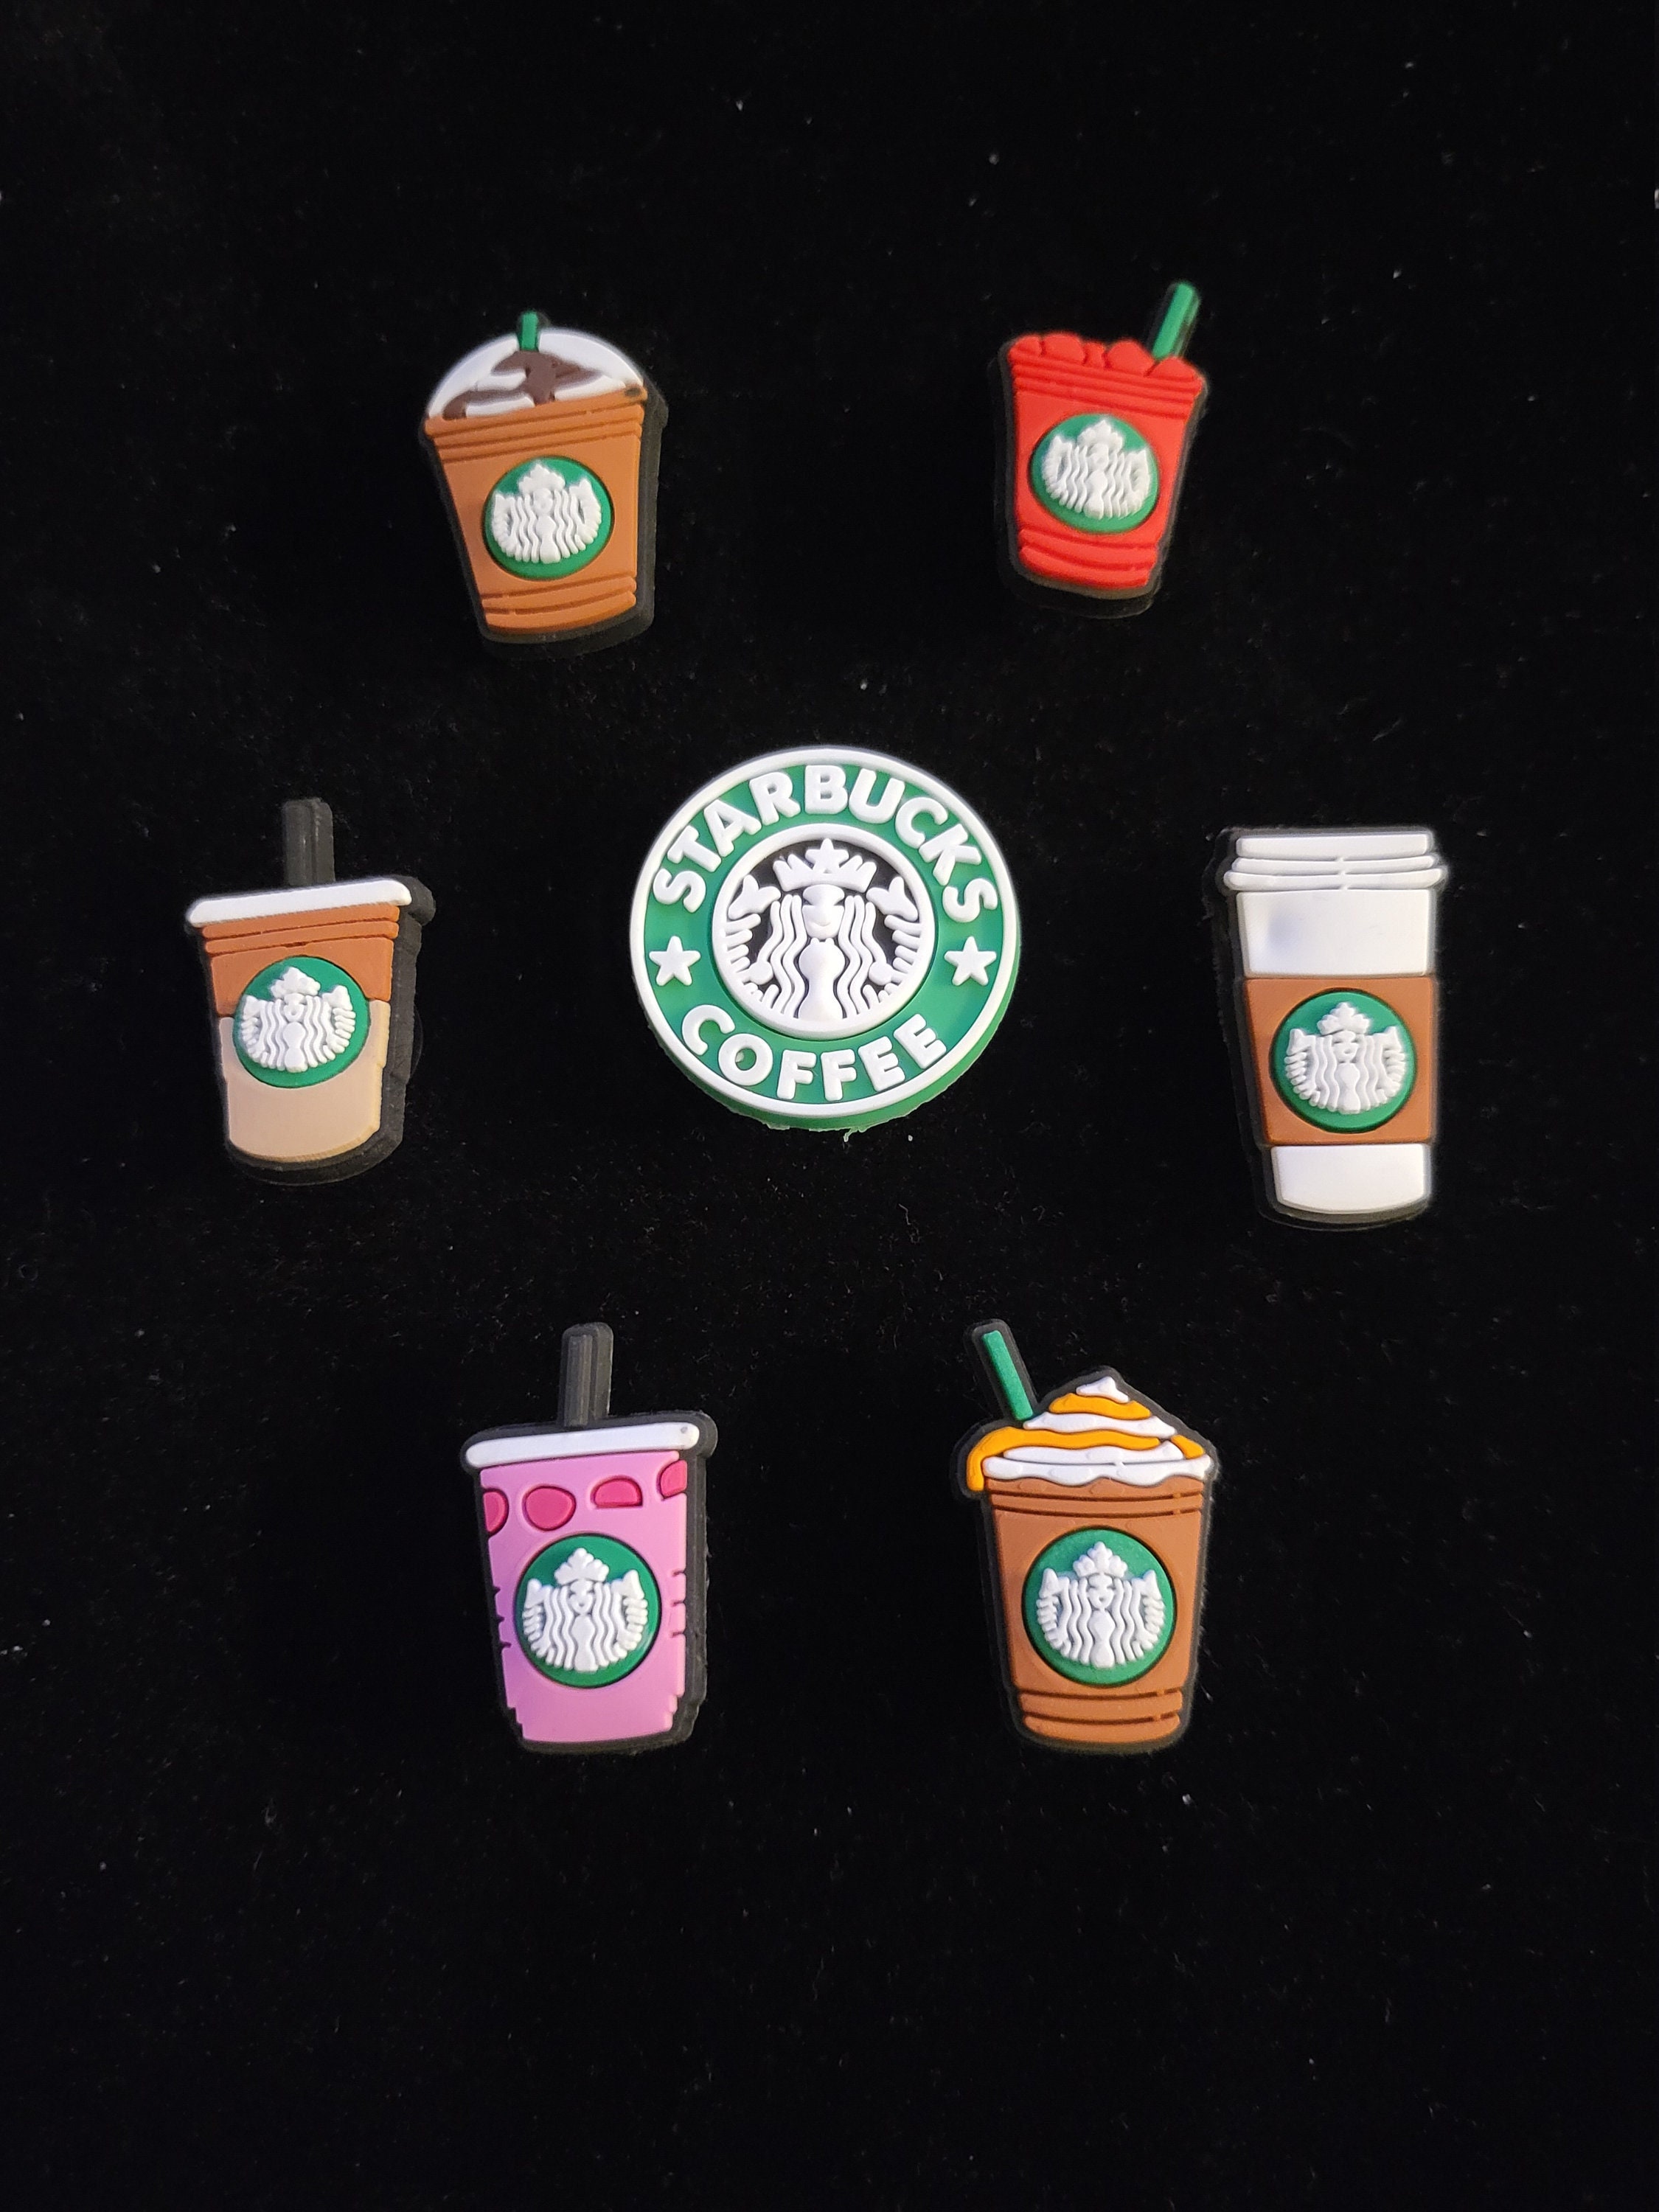 Crocs Starbucks Hot Coffee Drinks Charm For Shoe Charms - 2 Pieces - $6 -  From Nikolai